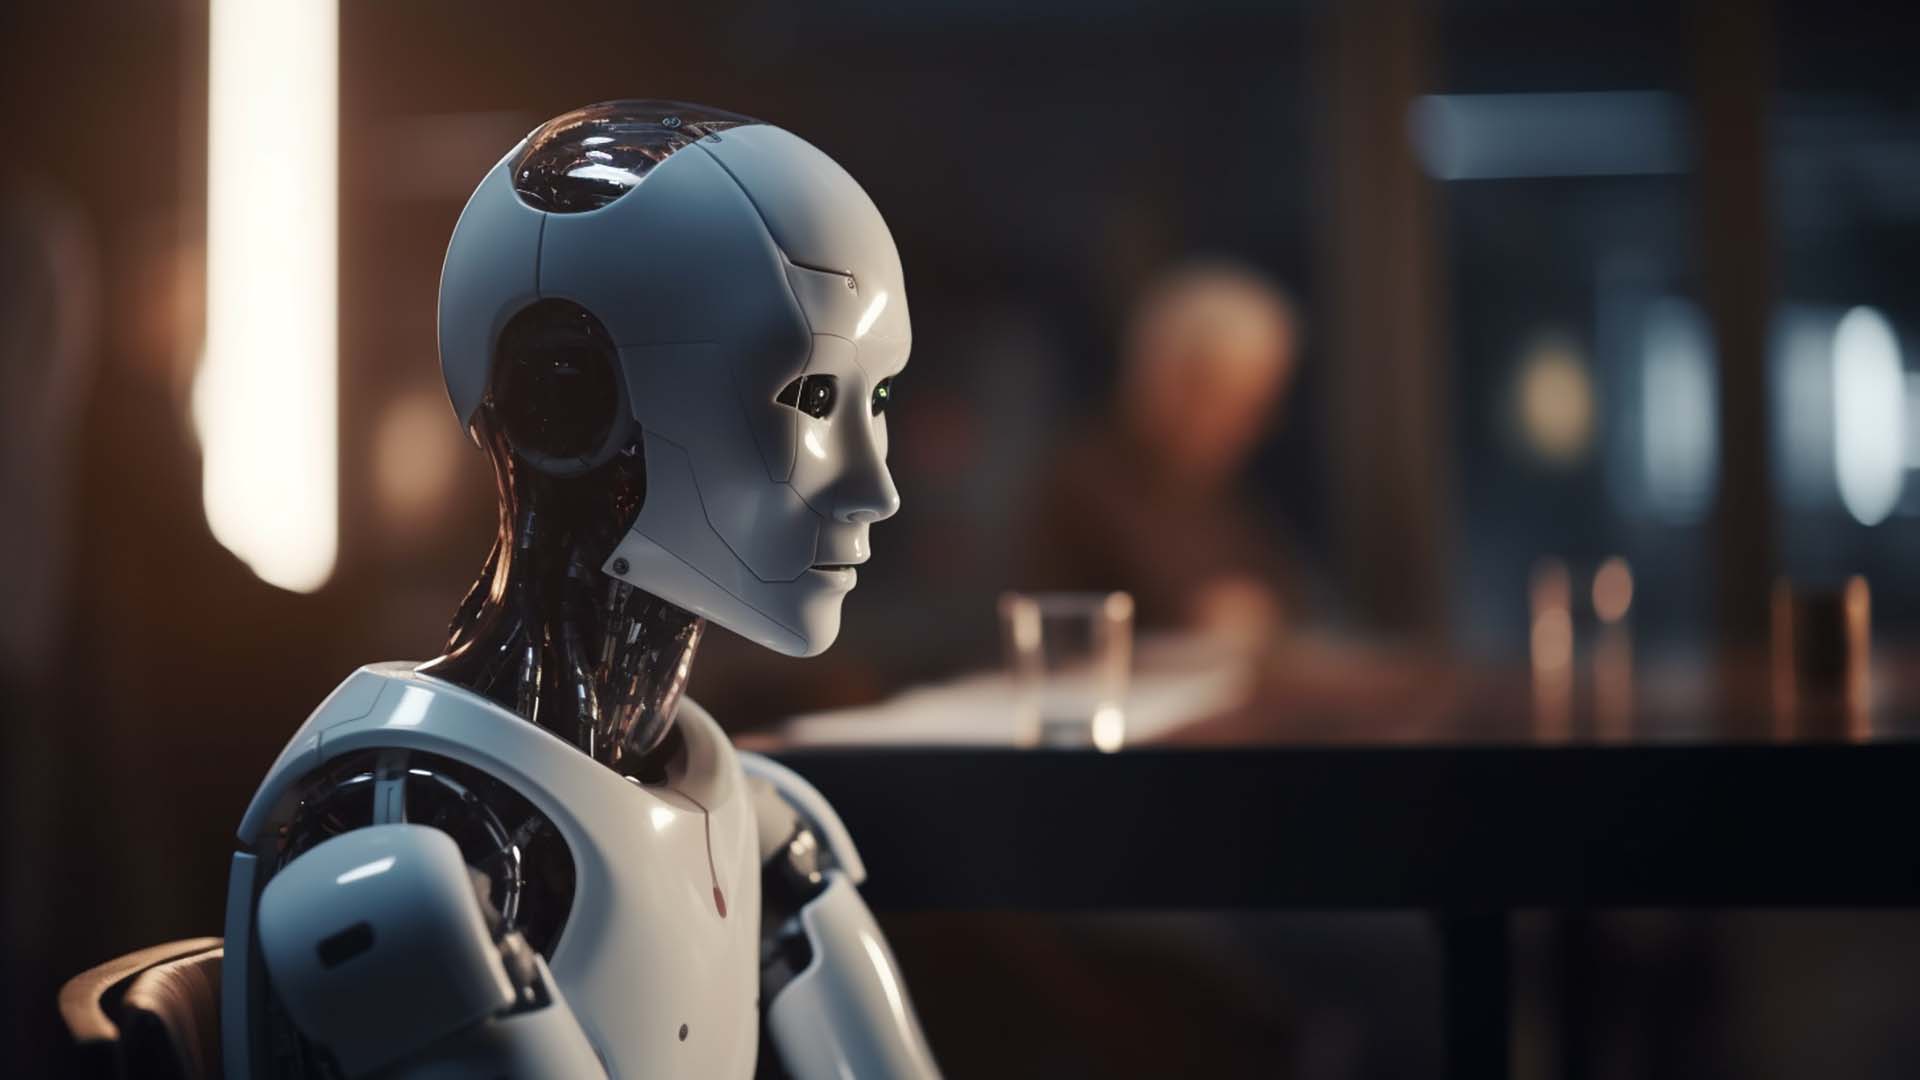 A picture of an humanoid robot sitting in a café.